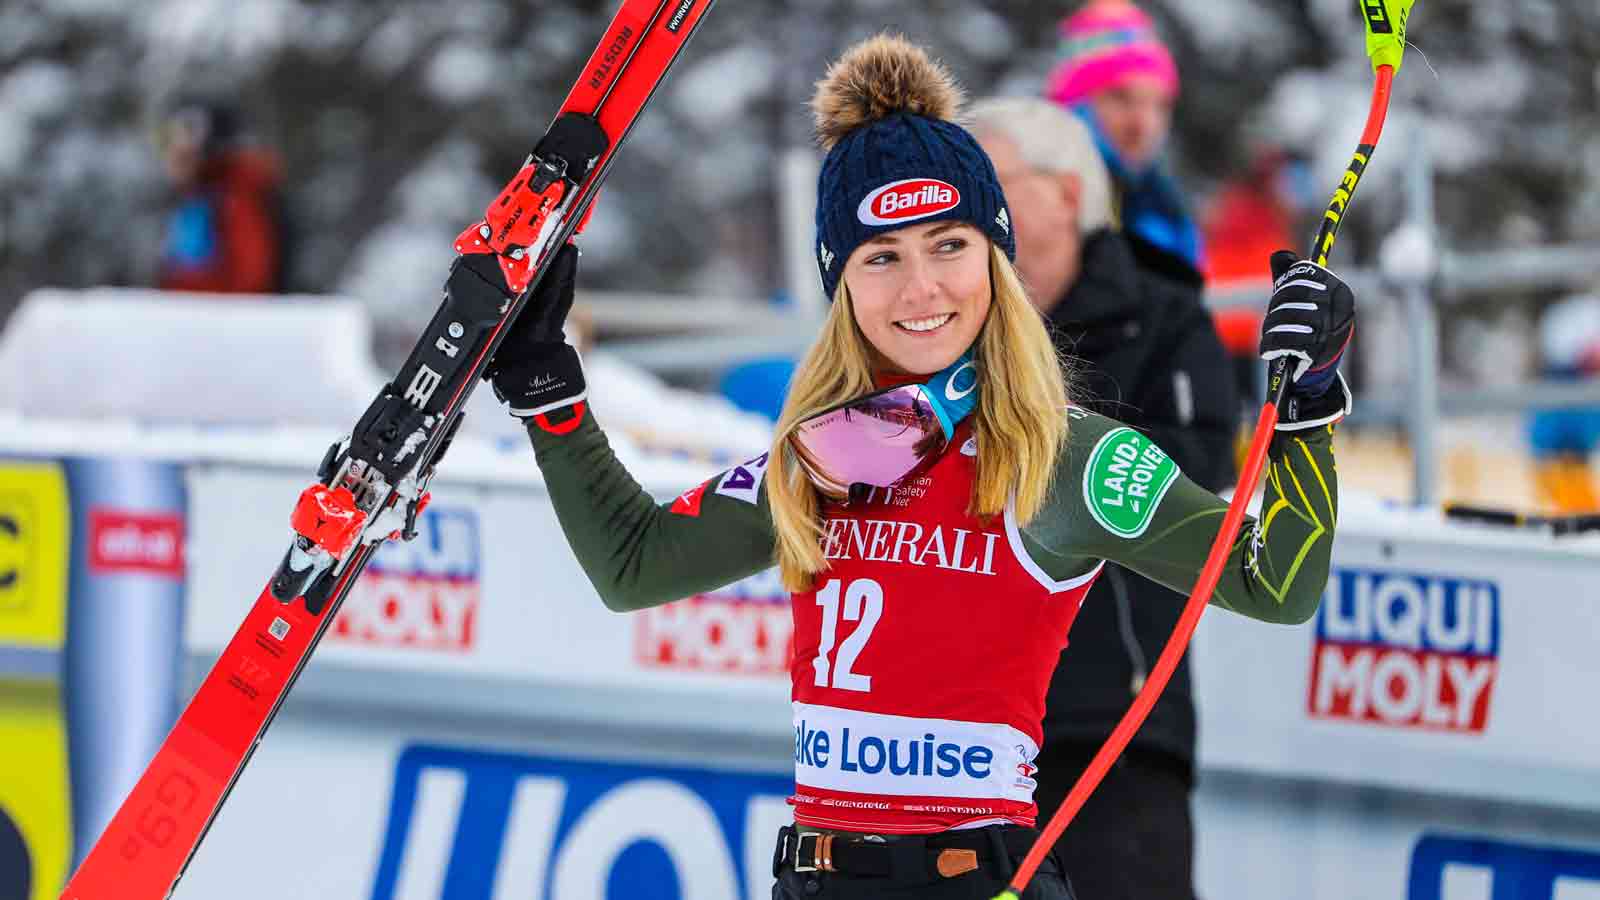 How to Watch Mikaela Shiffrin at the Alpine Skiing World Cup